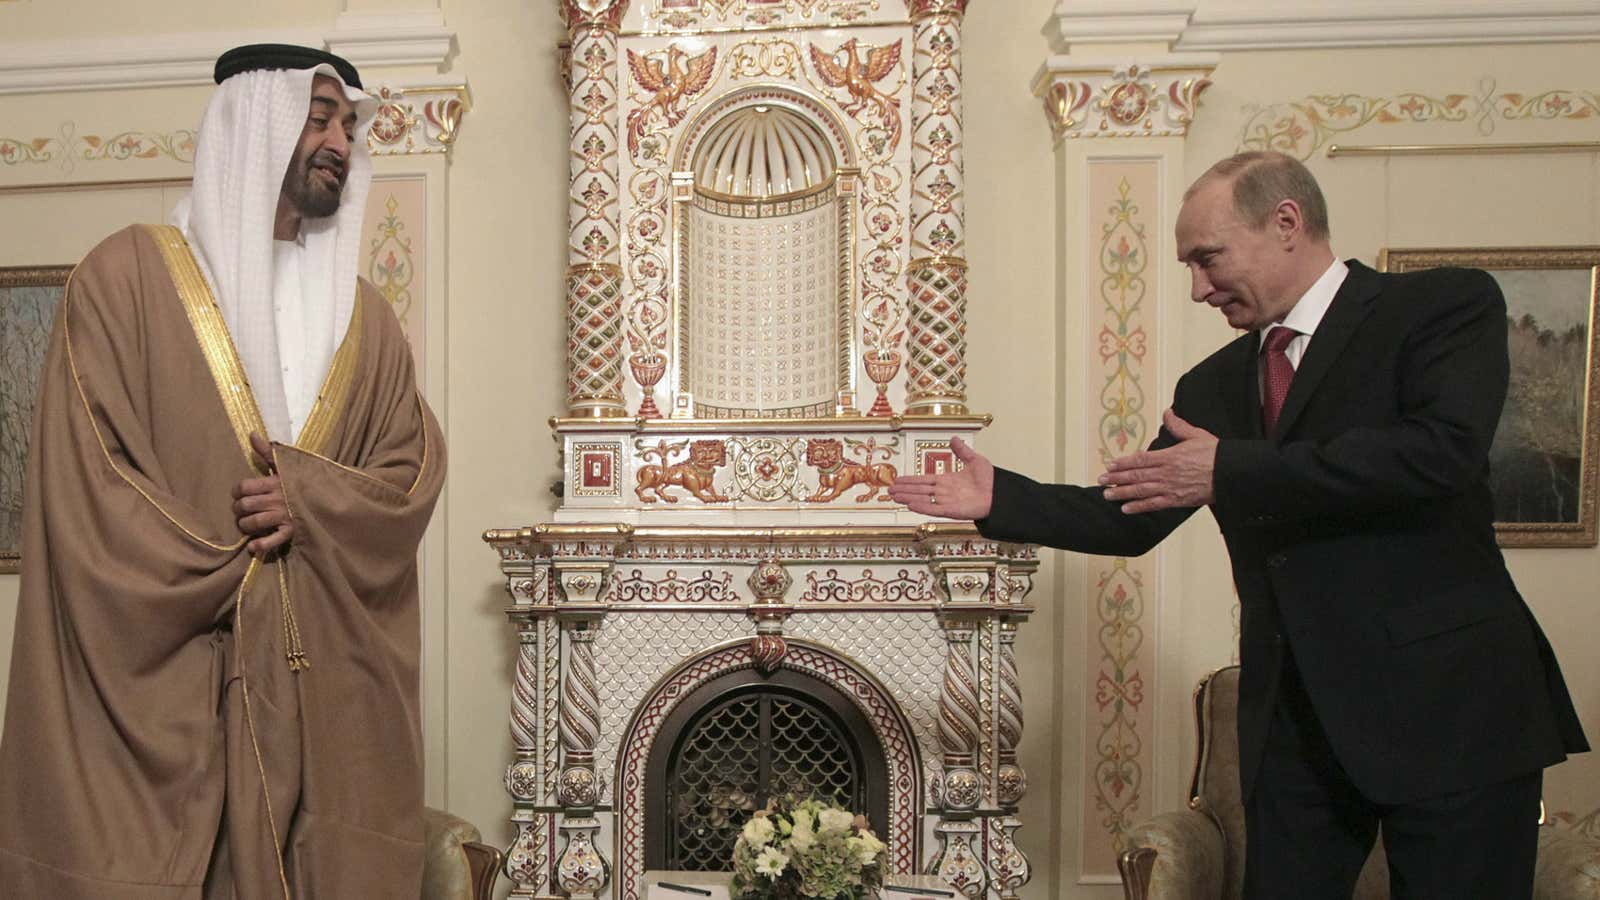 Russia’s President Vladimir Putin meets with United Arab Emirates Crown Prince Sheikh Mohammed bin Zayed Al Nahyan